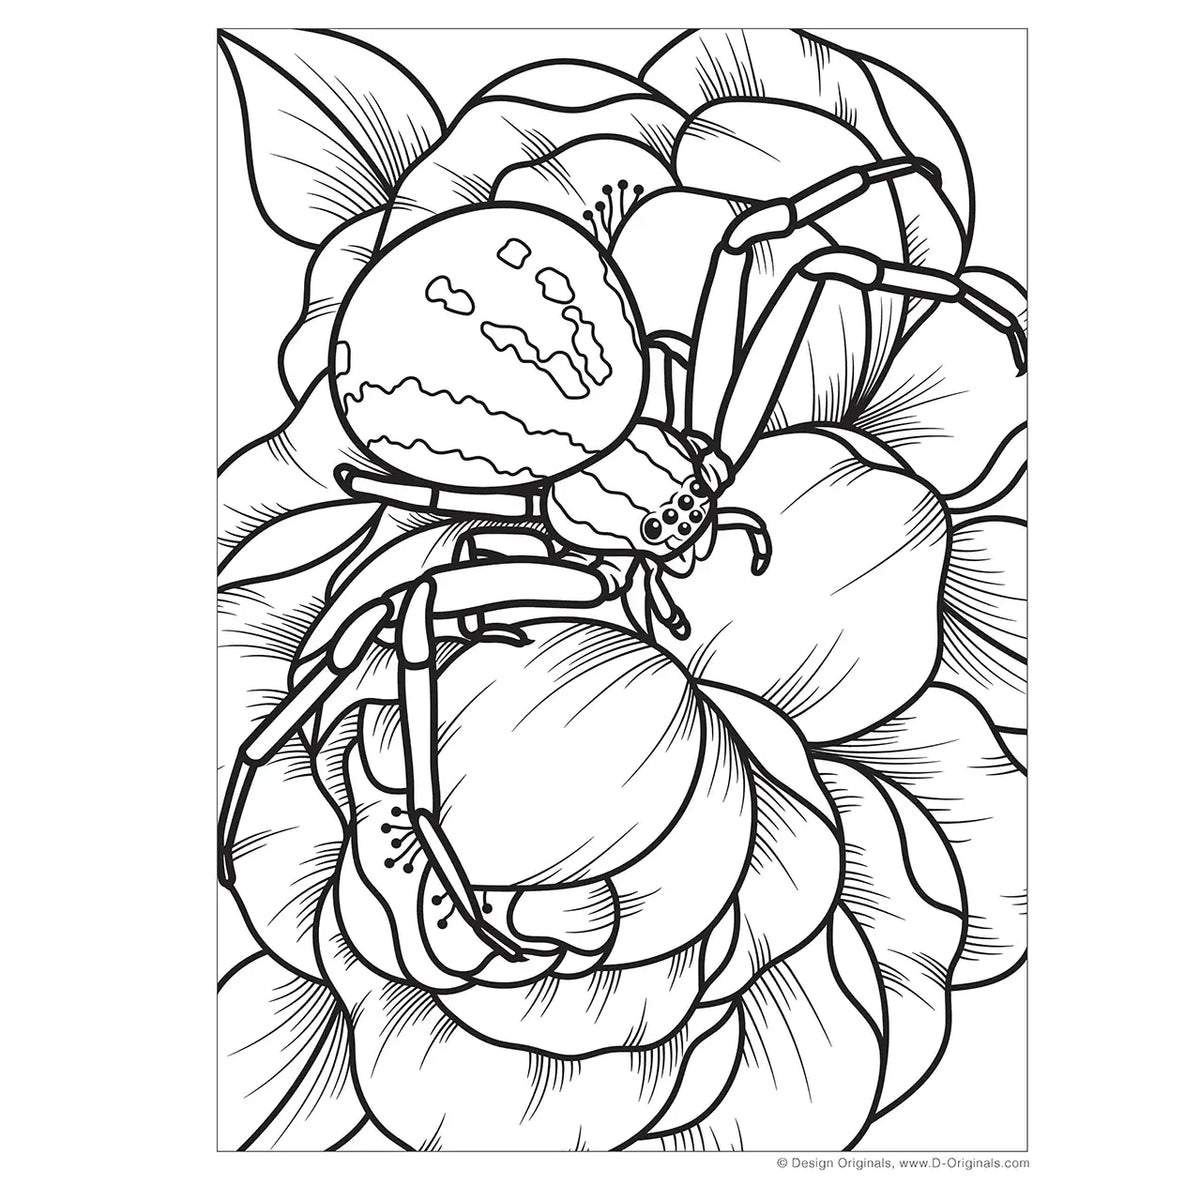 Super Cool Bugs & Spiders Coloring Book Cover